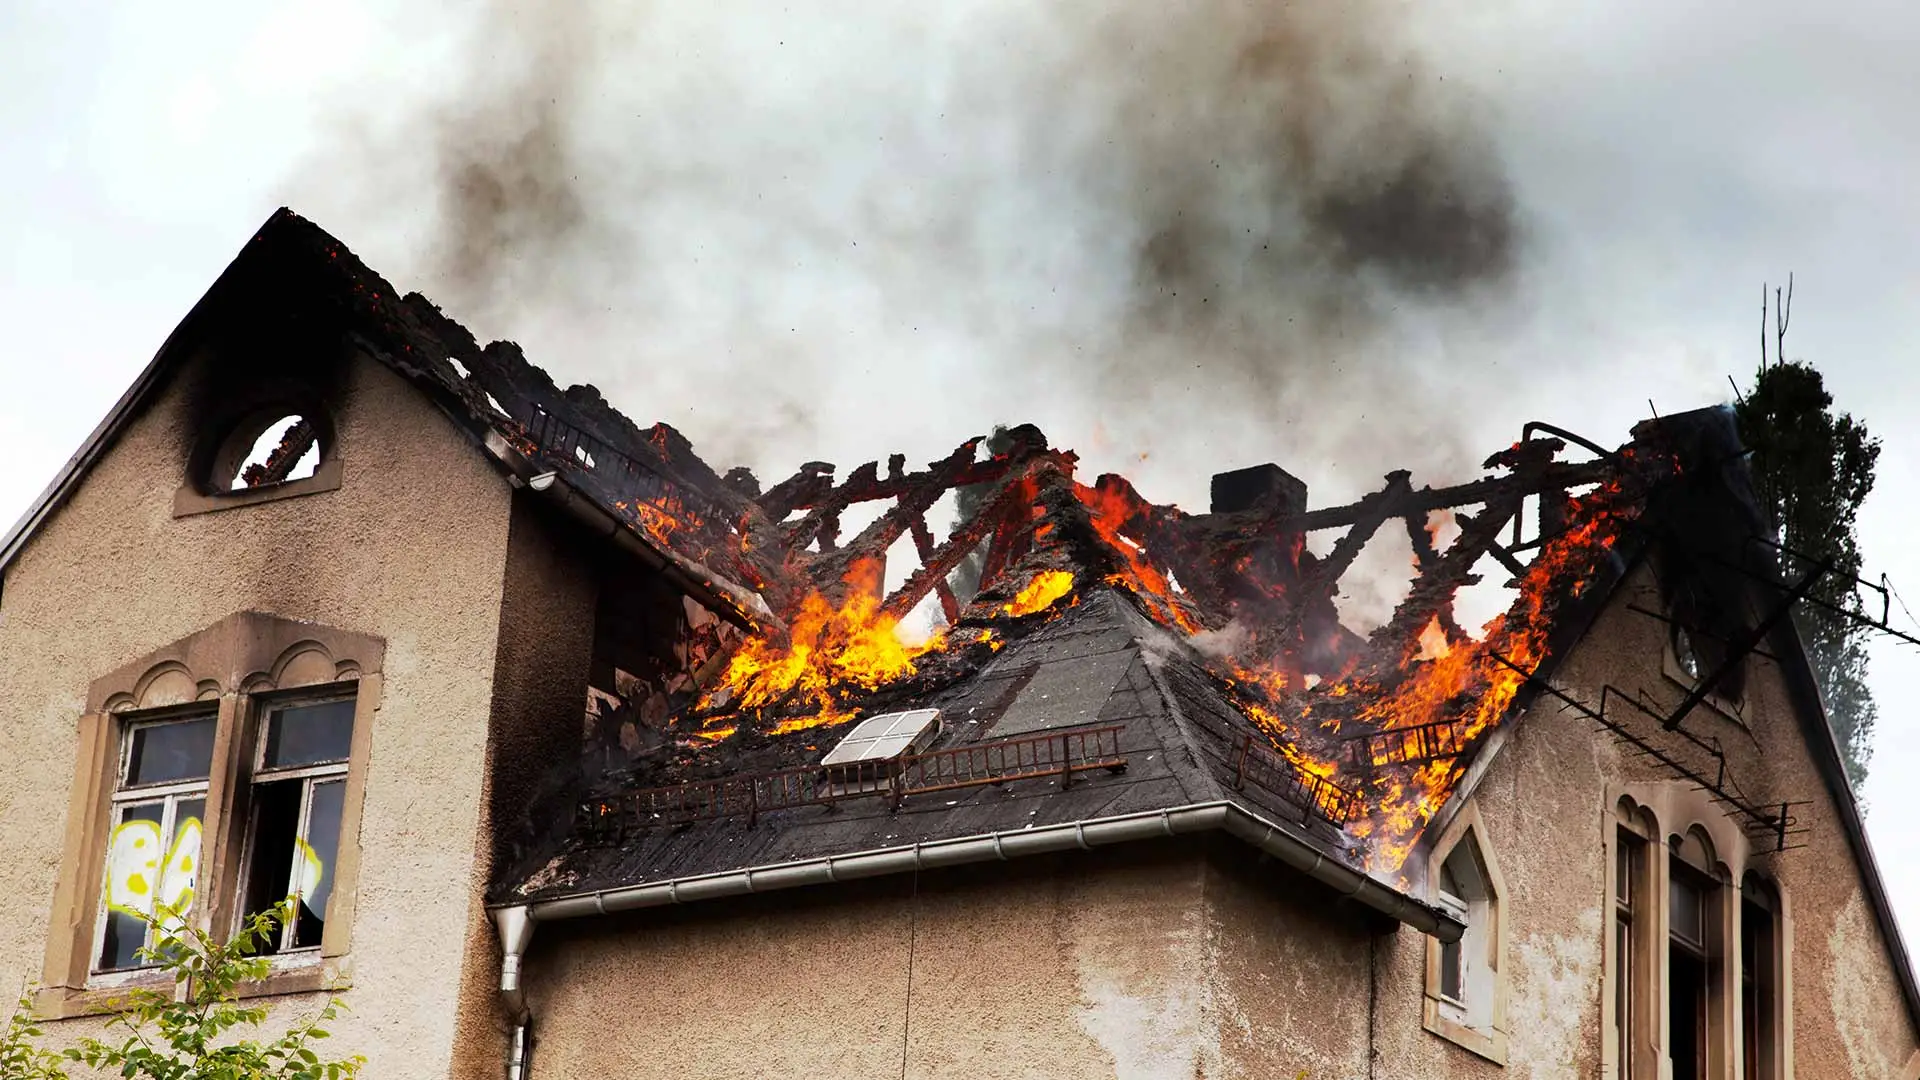 Does Homeowners' Insurance Cover Water & Fire Damage If You're at Fault?